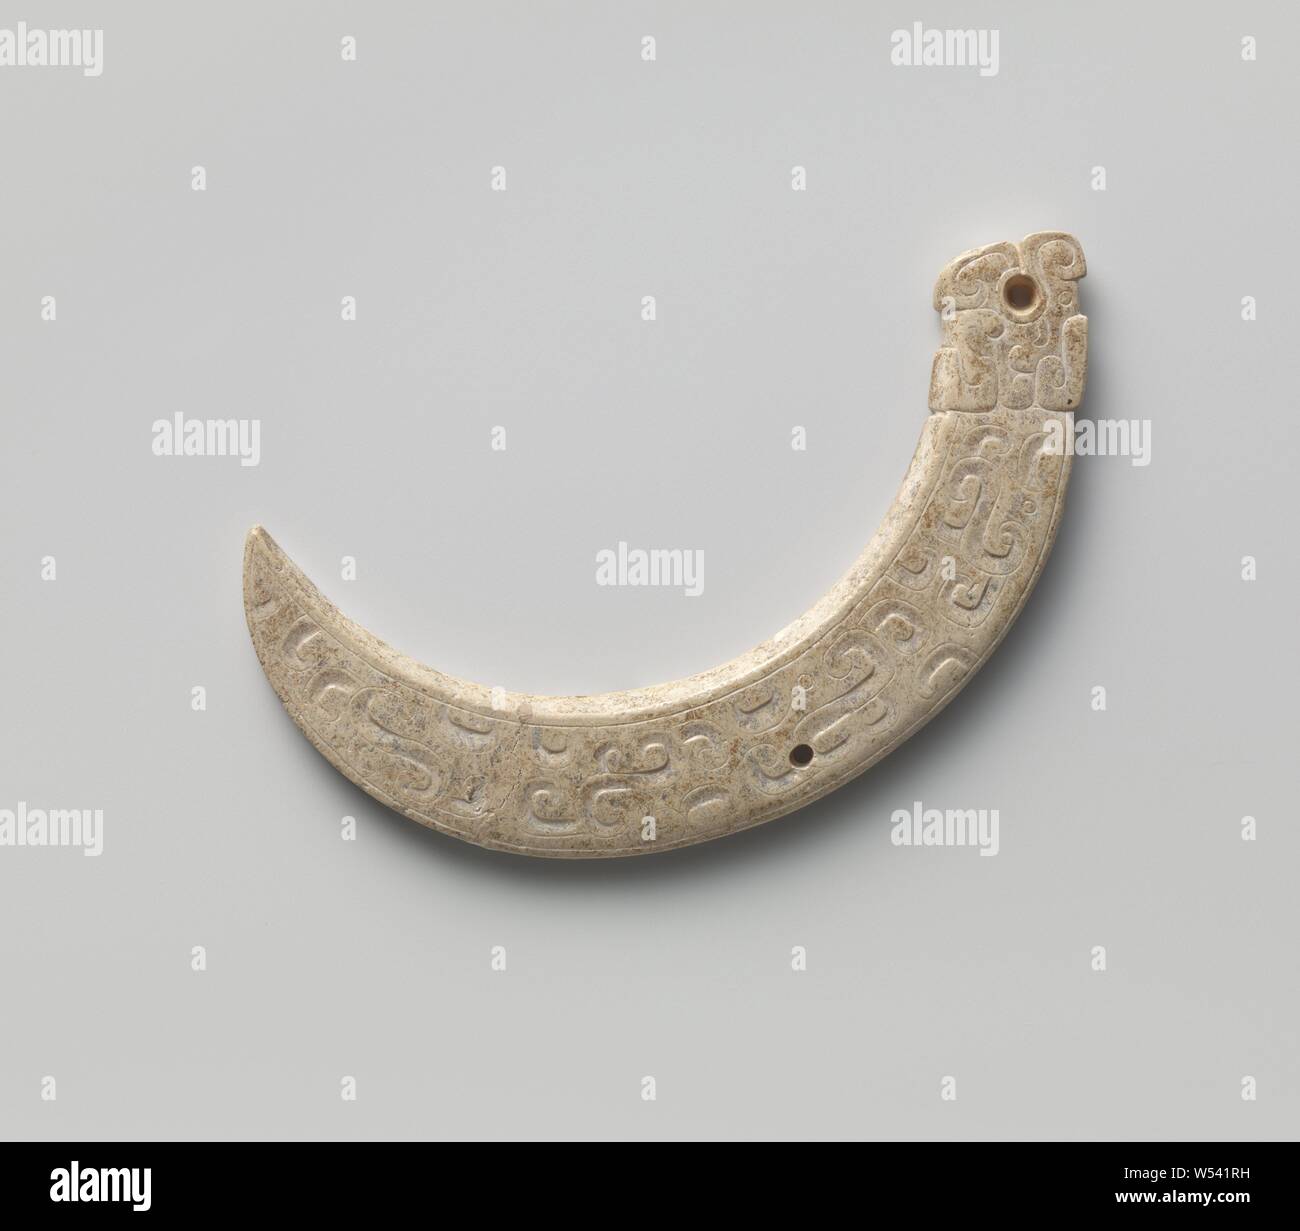 Decorative object, Ornament in cream-colored jade, presumably tail fragment of a mythical animal., anonymous, China, -500 - -200, Zhou-dynasty (1050 B.C.-221 B.C.), jade (rock), w 6.8 cm × h 6.0 cm × d 0.4 cm Stock Photo